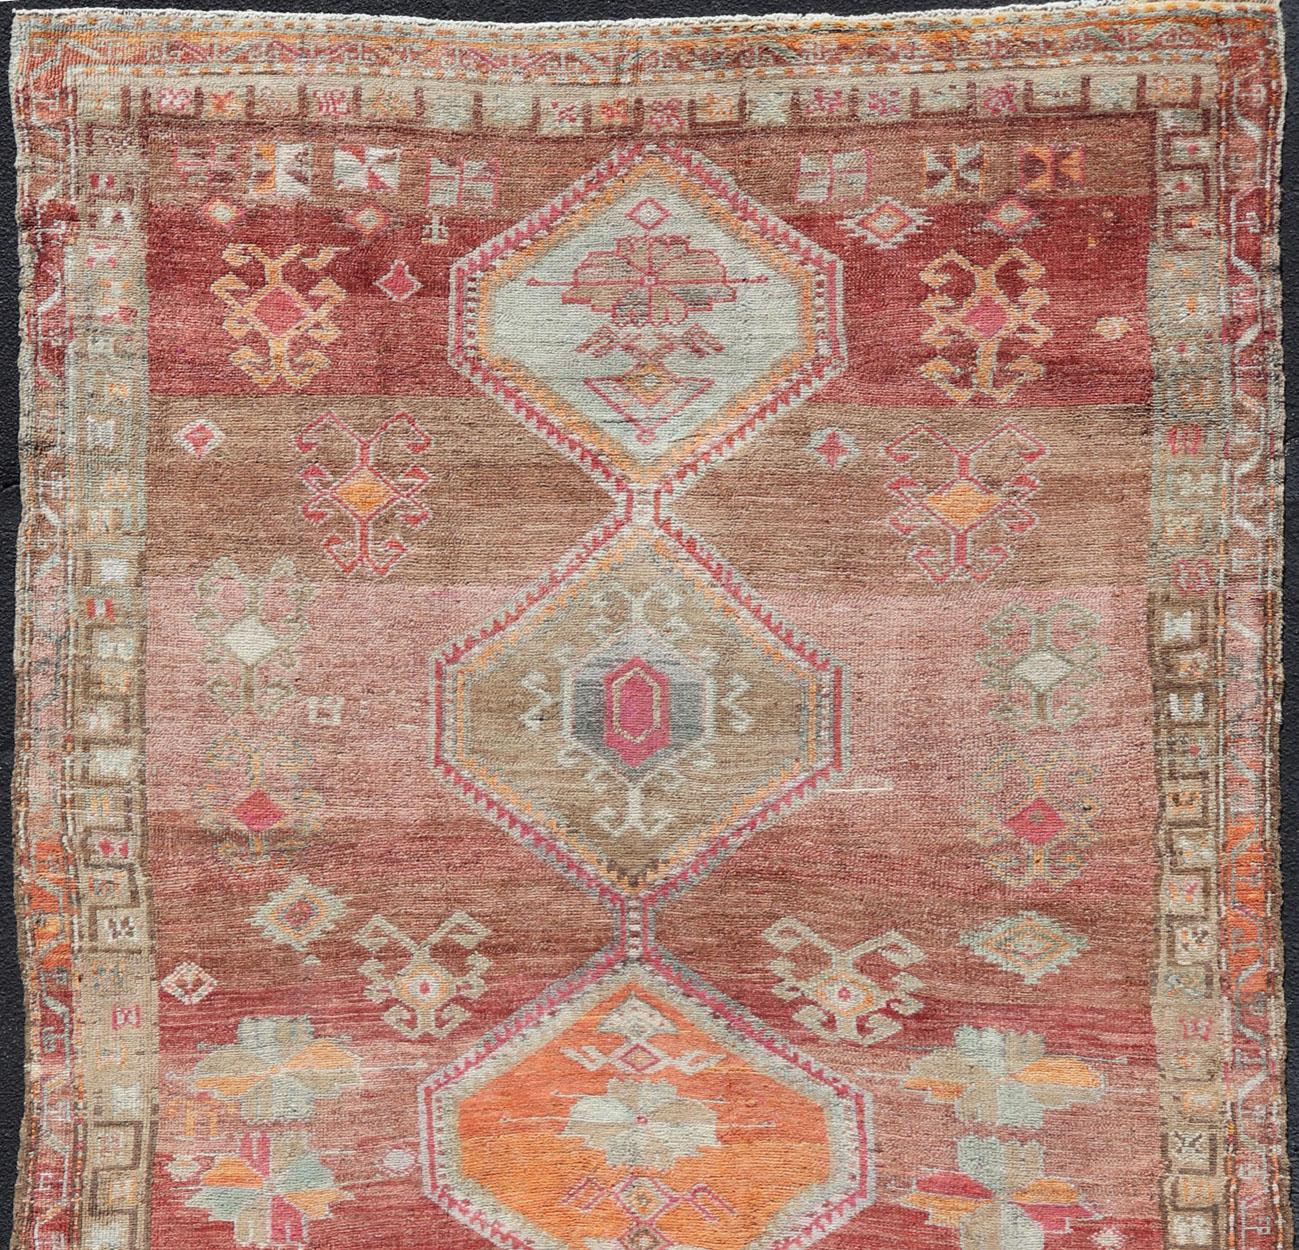 Turkish tribal design colorful gallery runner in soft red and multi colors, rug EN-179883, country of origin / type: Turkey / Oushak, circa 1930

This expansive Gallery rug from Turkey features a colorful pattern of unique tribal medallion